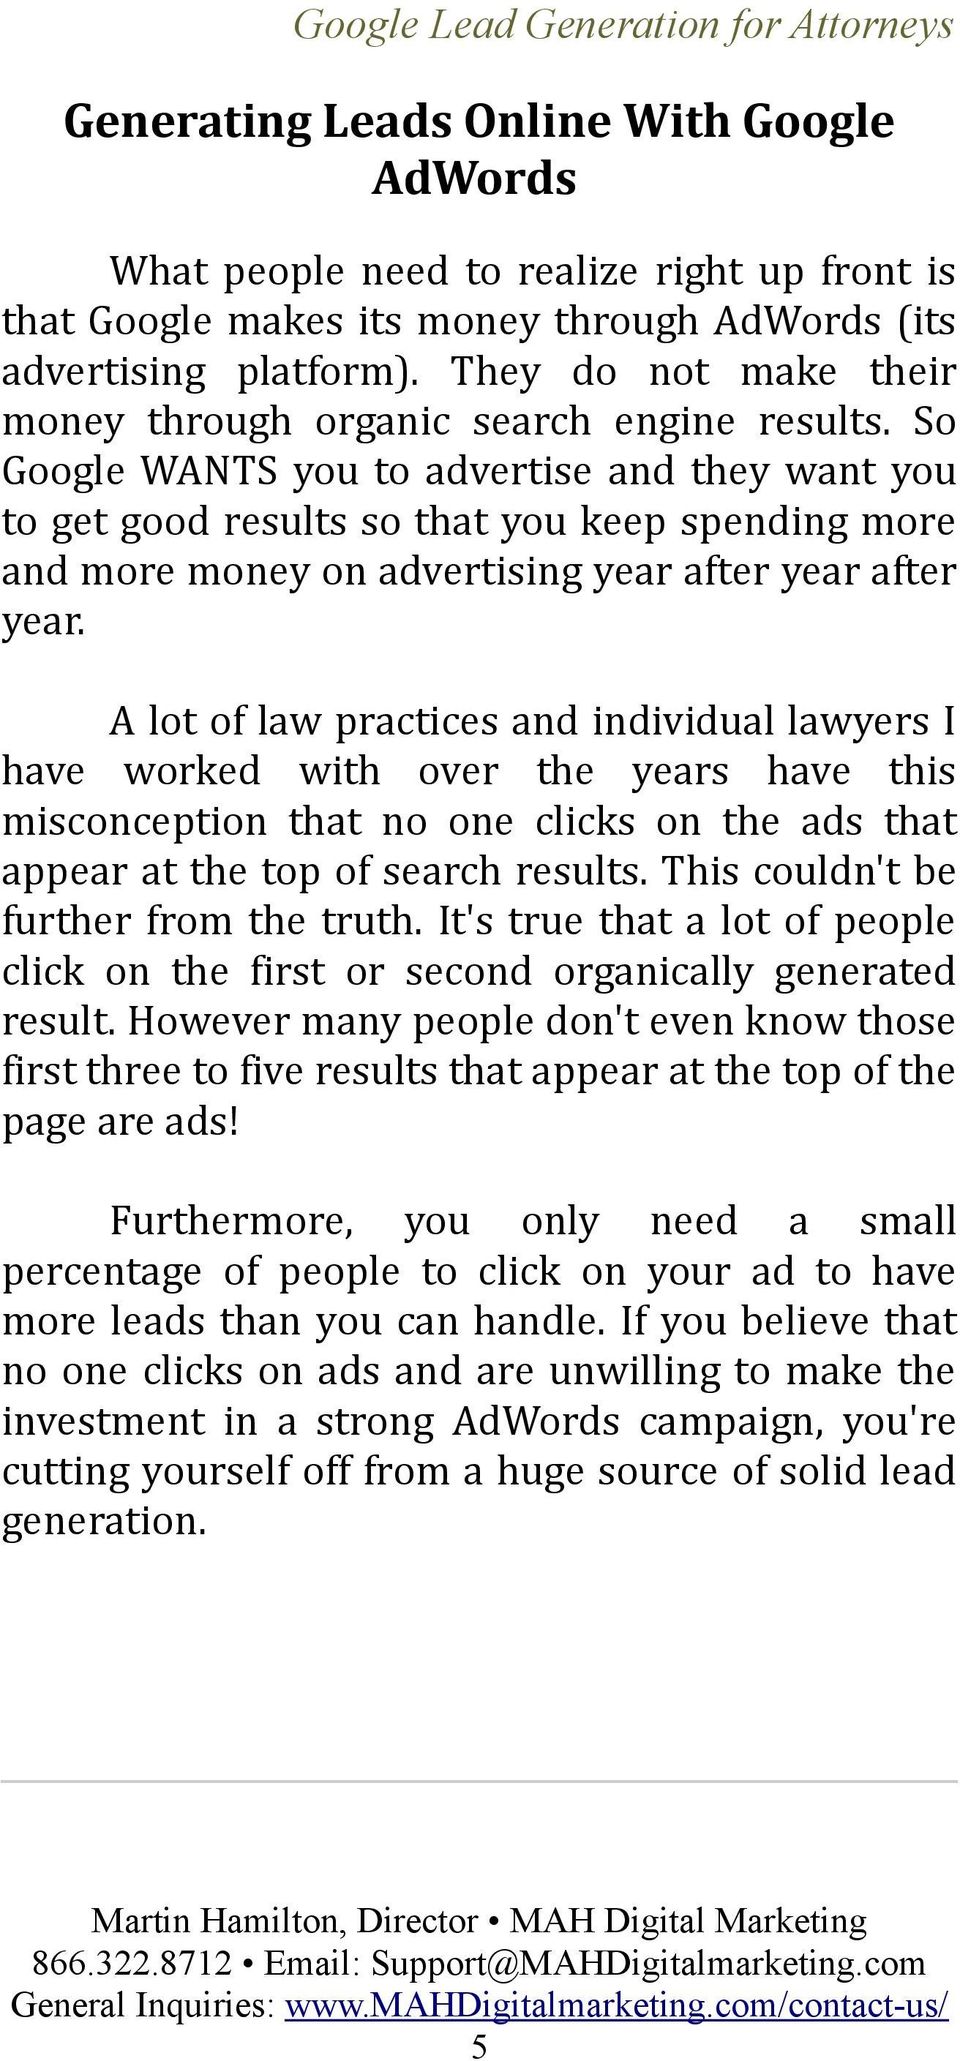 So Google WANTS you to advertise and they want you to get good results so that you keep spending more and more money on advertising year after year after year.